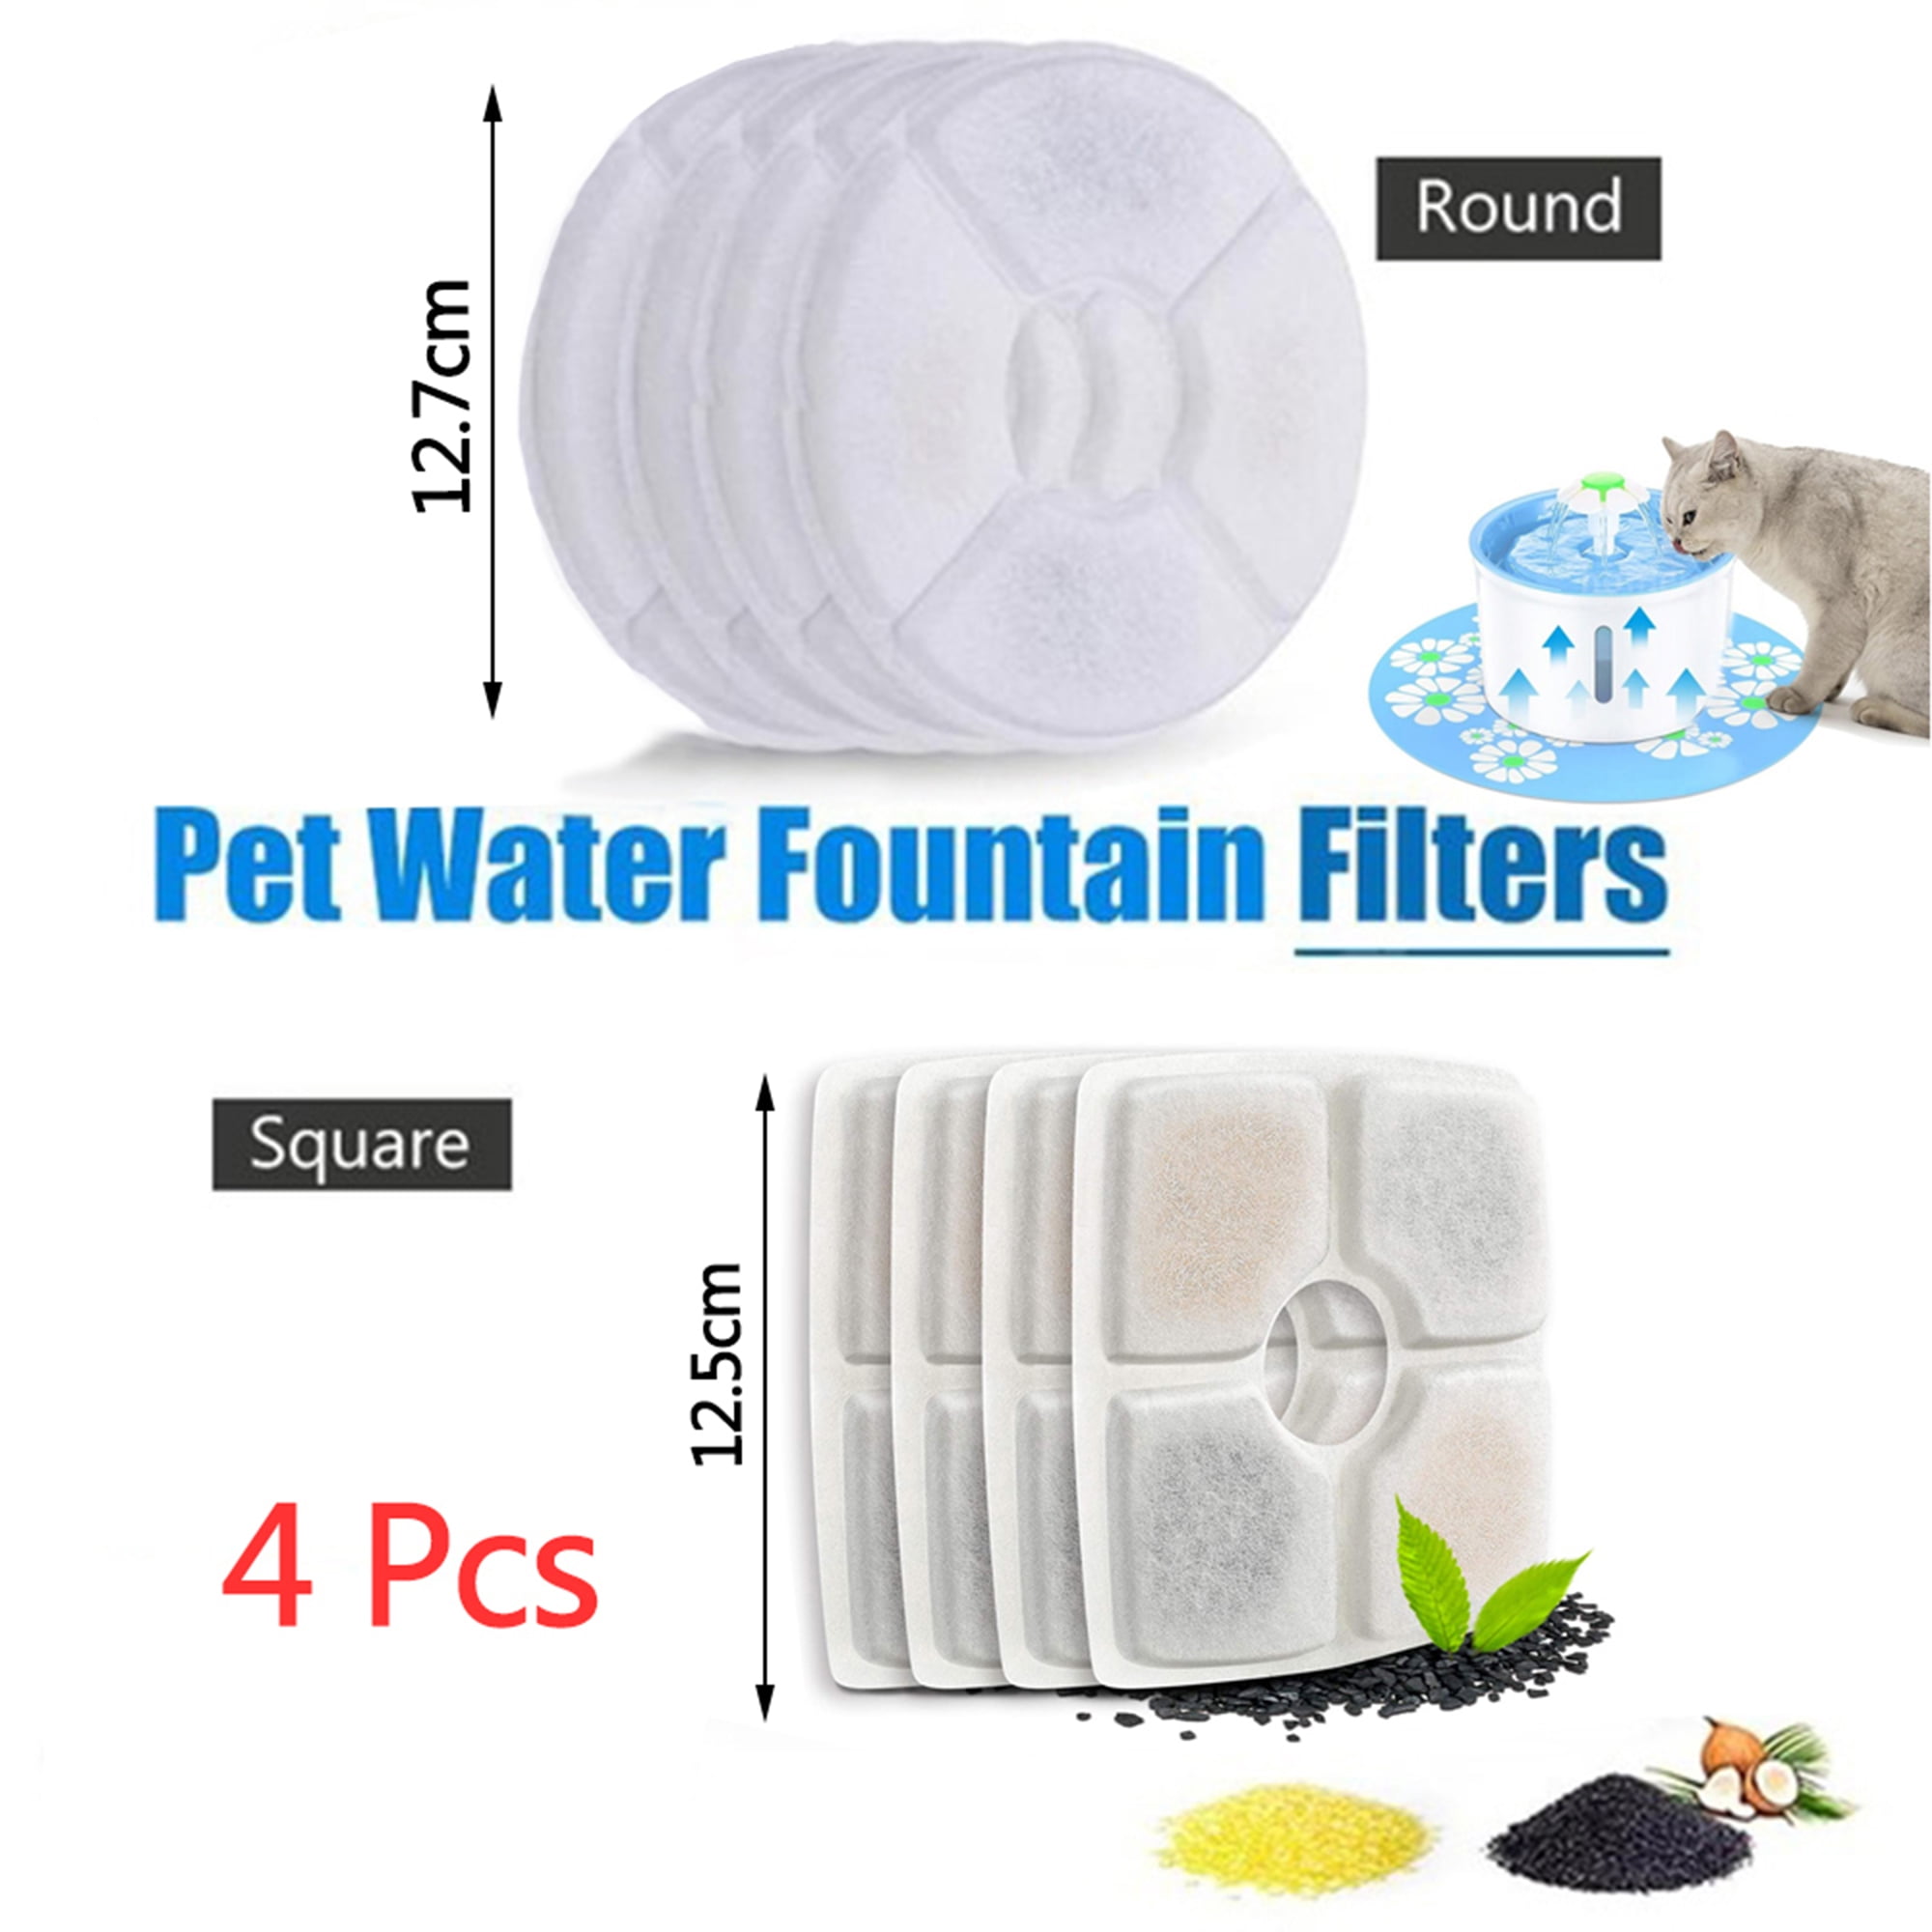 Pet Automatic Drinking Water Flower Dispenser Filters Replacement Best Fountain Filters for Dogs and Cats Activated Carbon Water Dispenser Filters 4 Pack Cat Water Fountain Filters